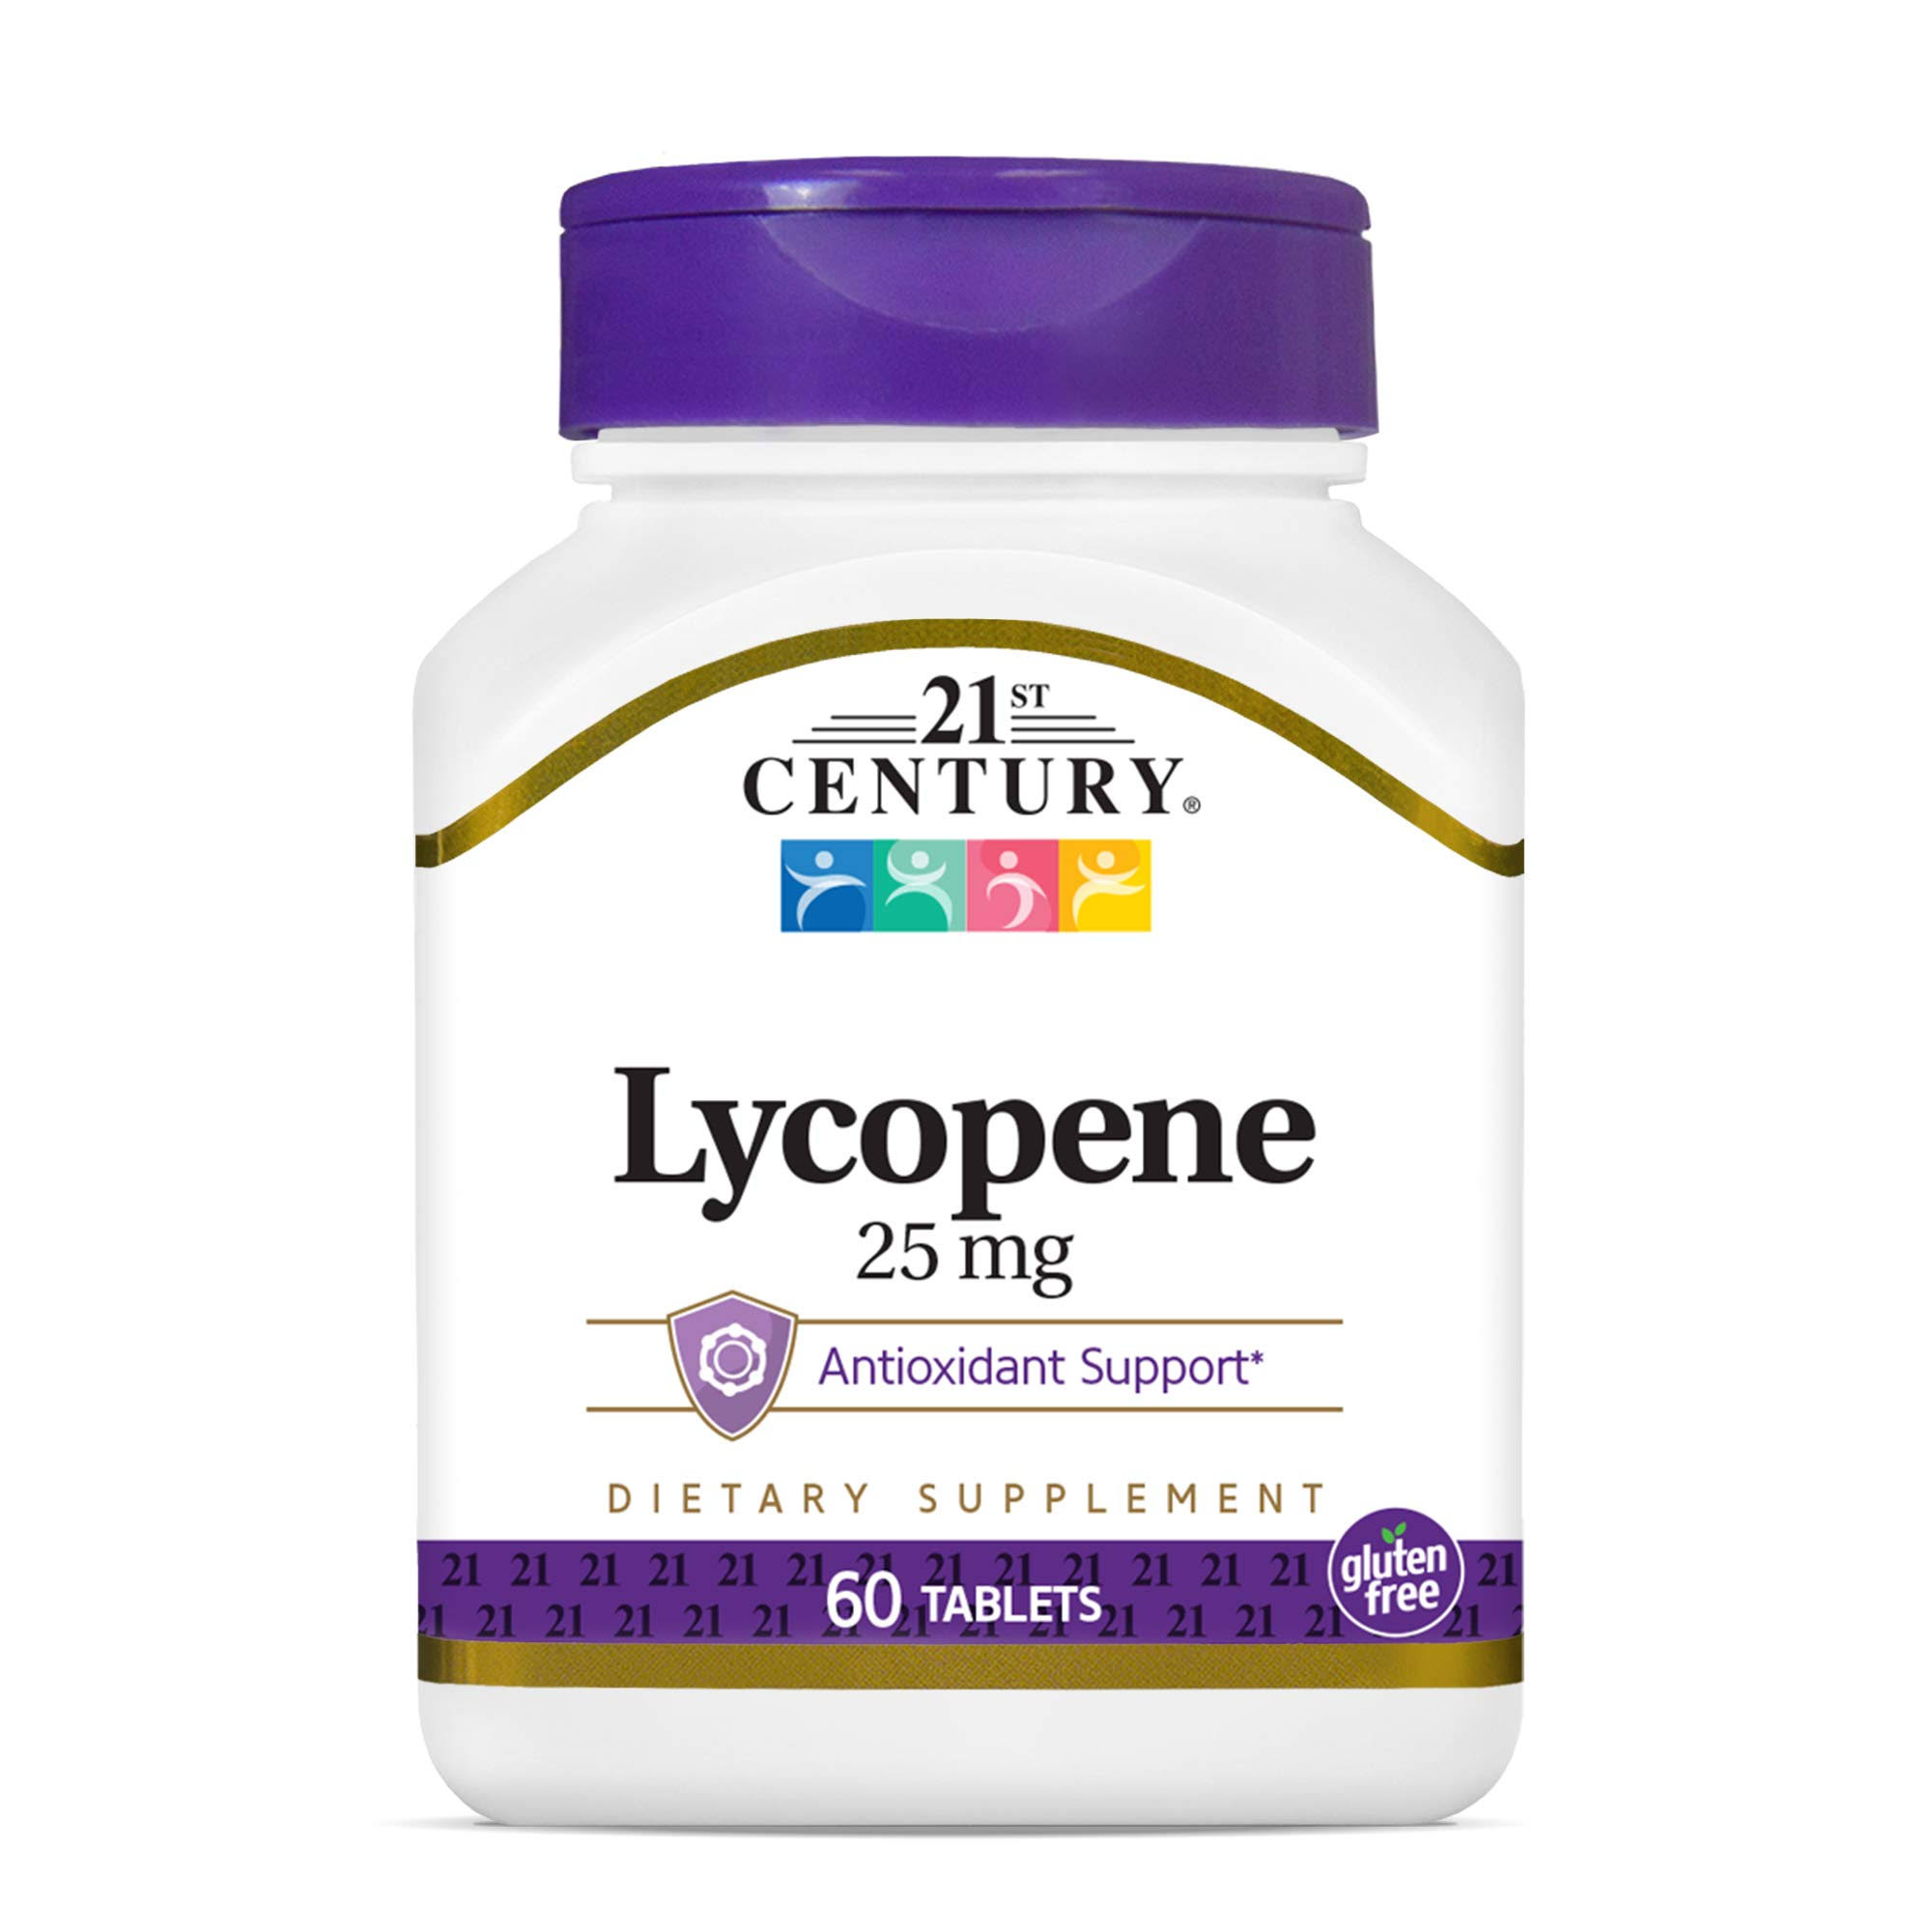 21st Century Lycopene Dietary Supplement - 25mg, 60 Tablets